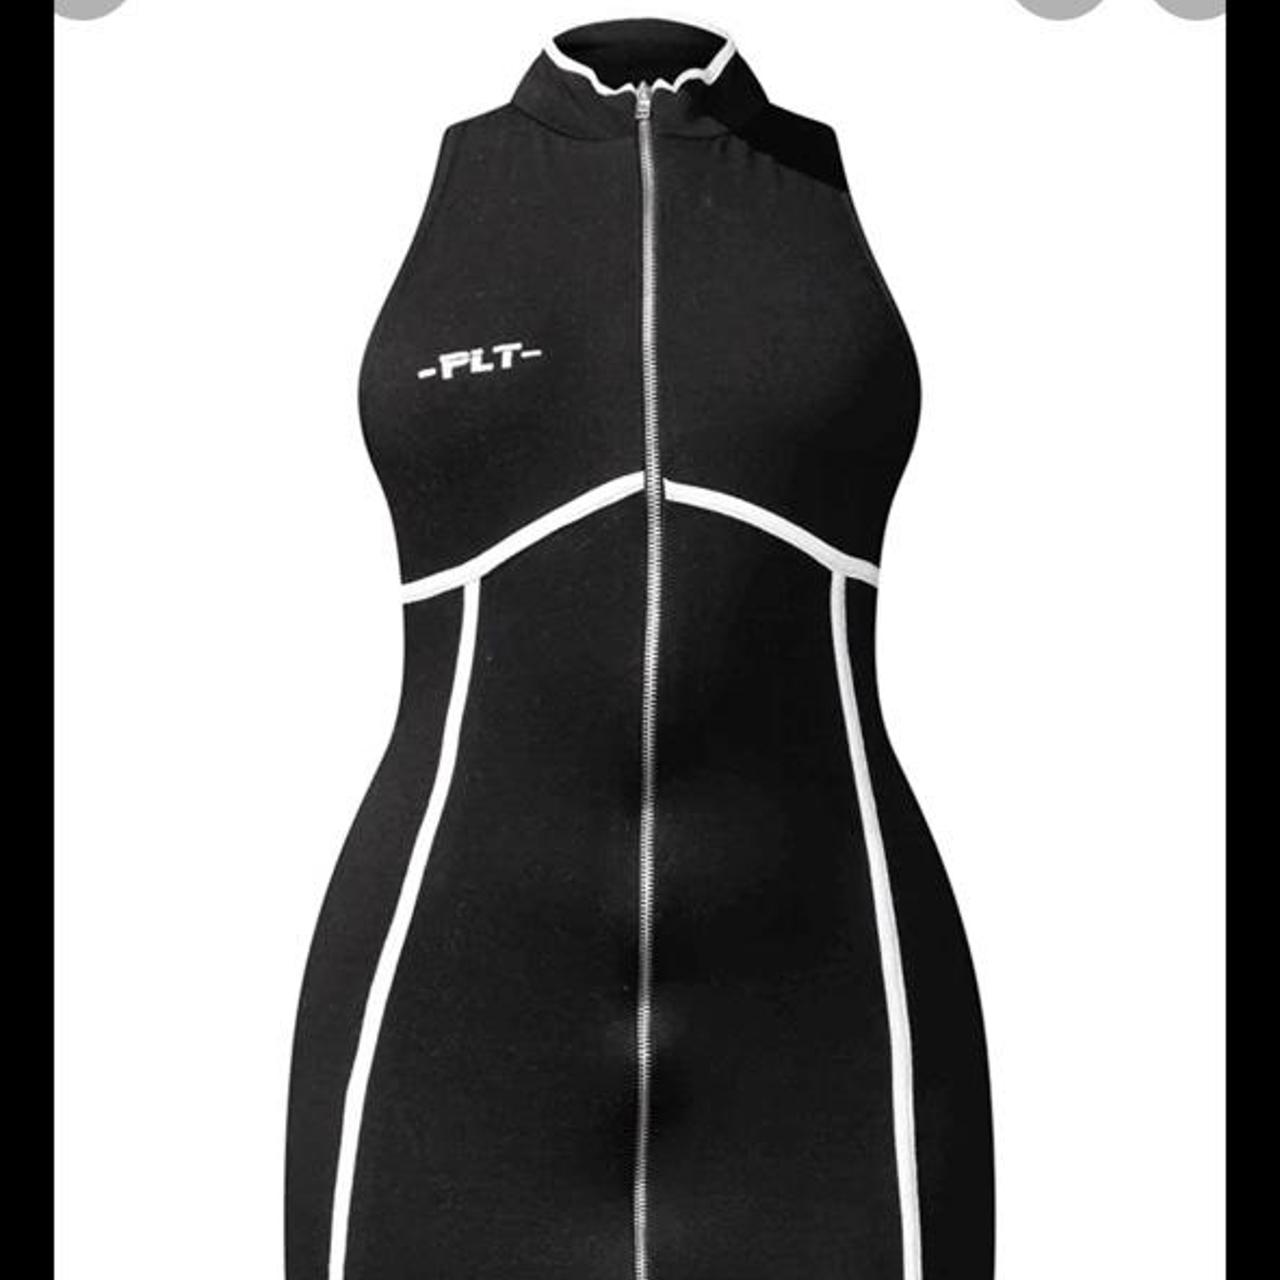 Product Image 2 - Black and white zip up